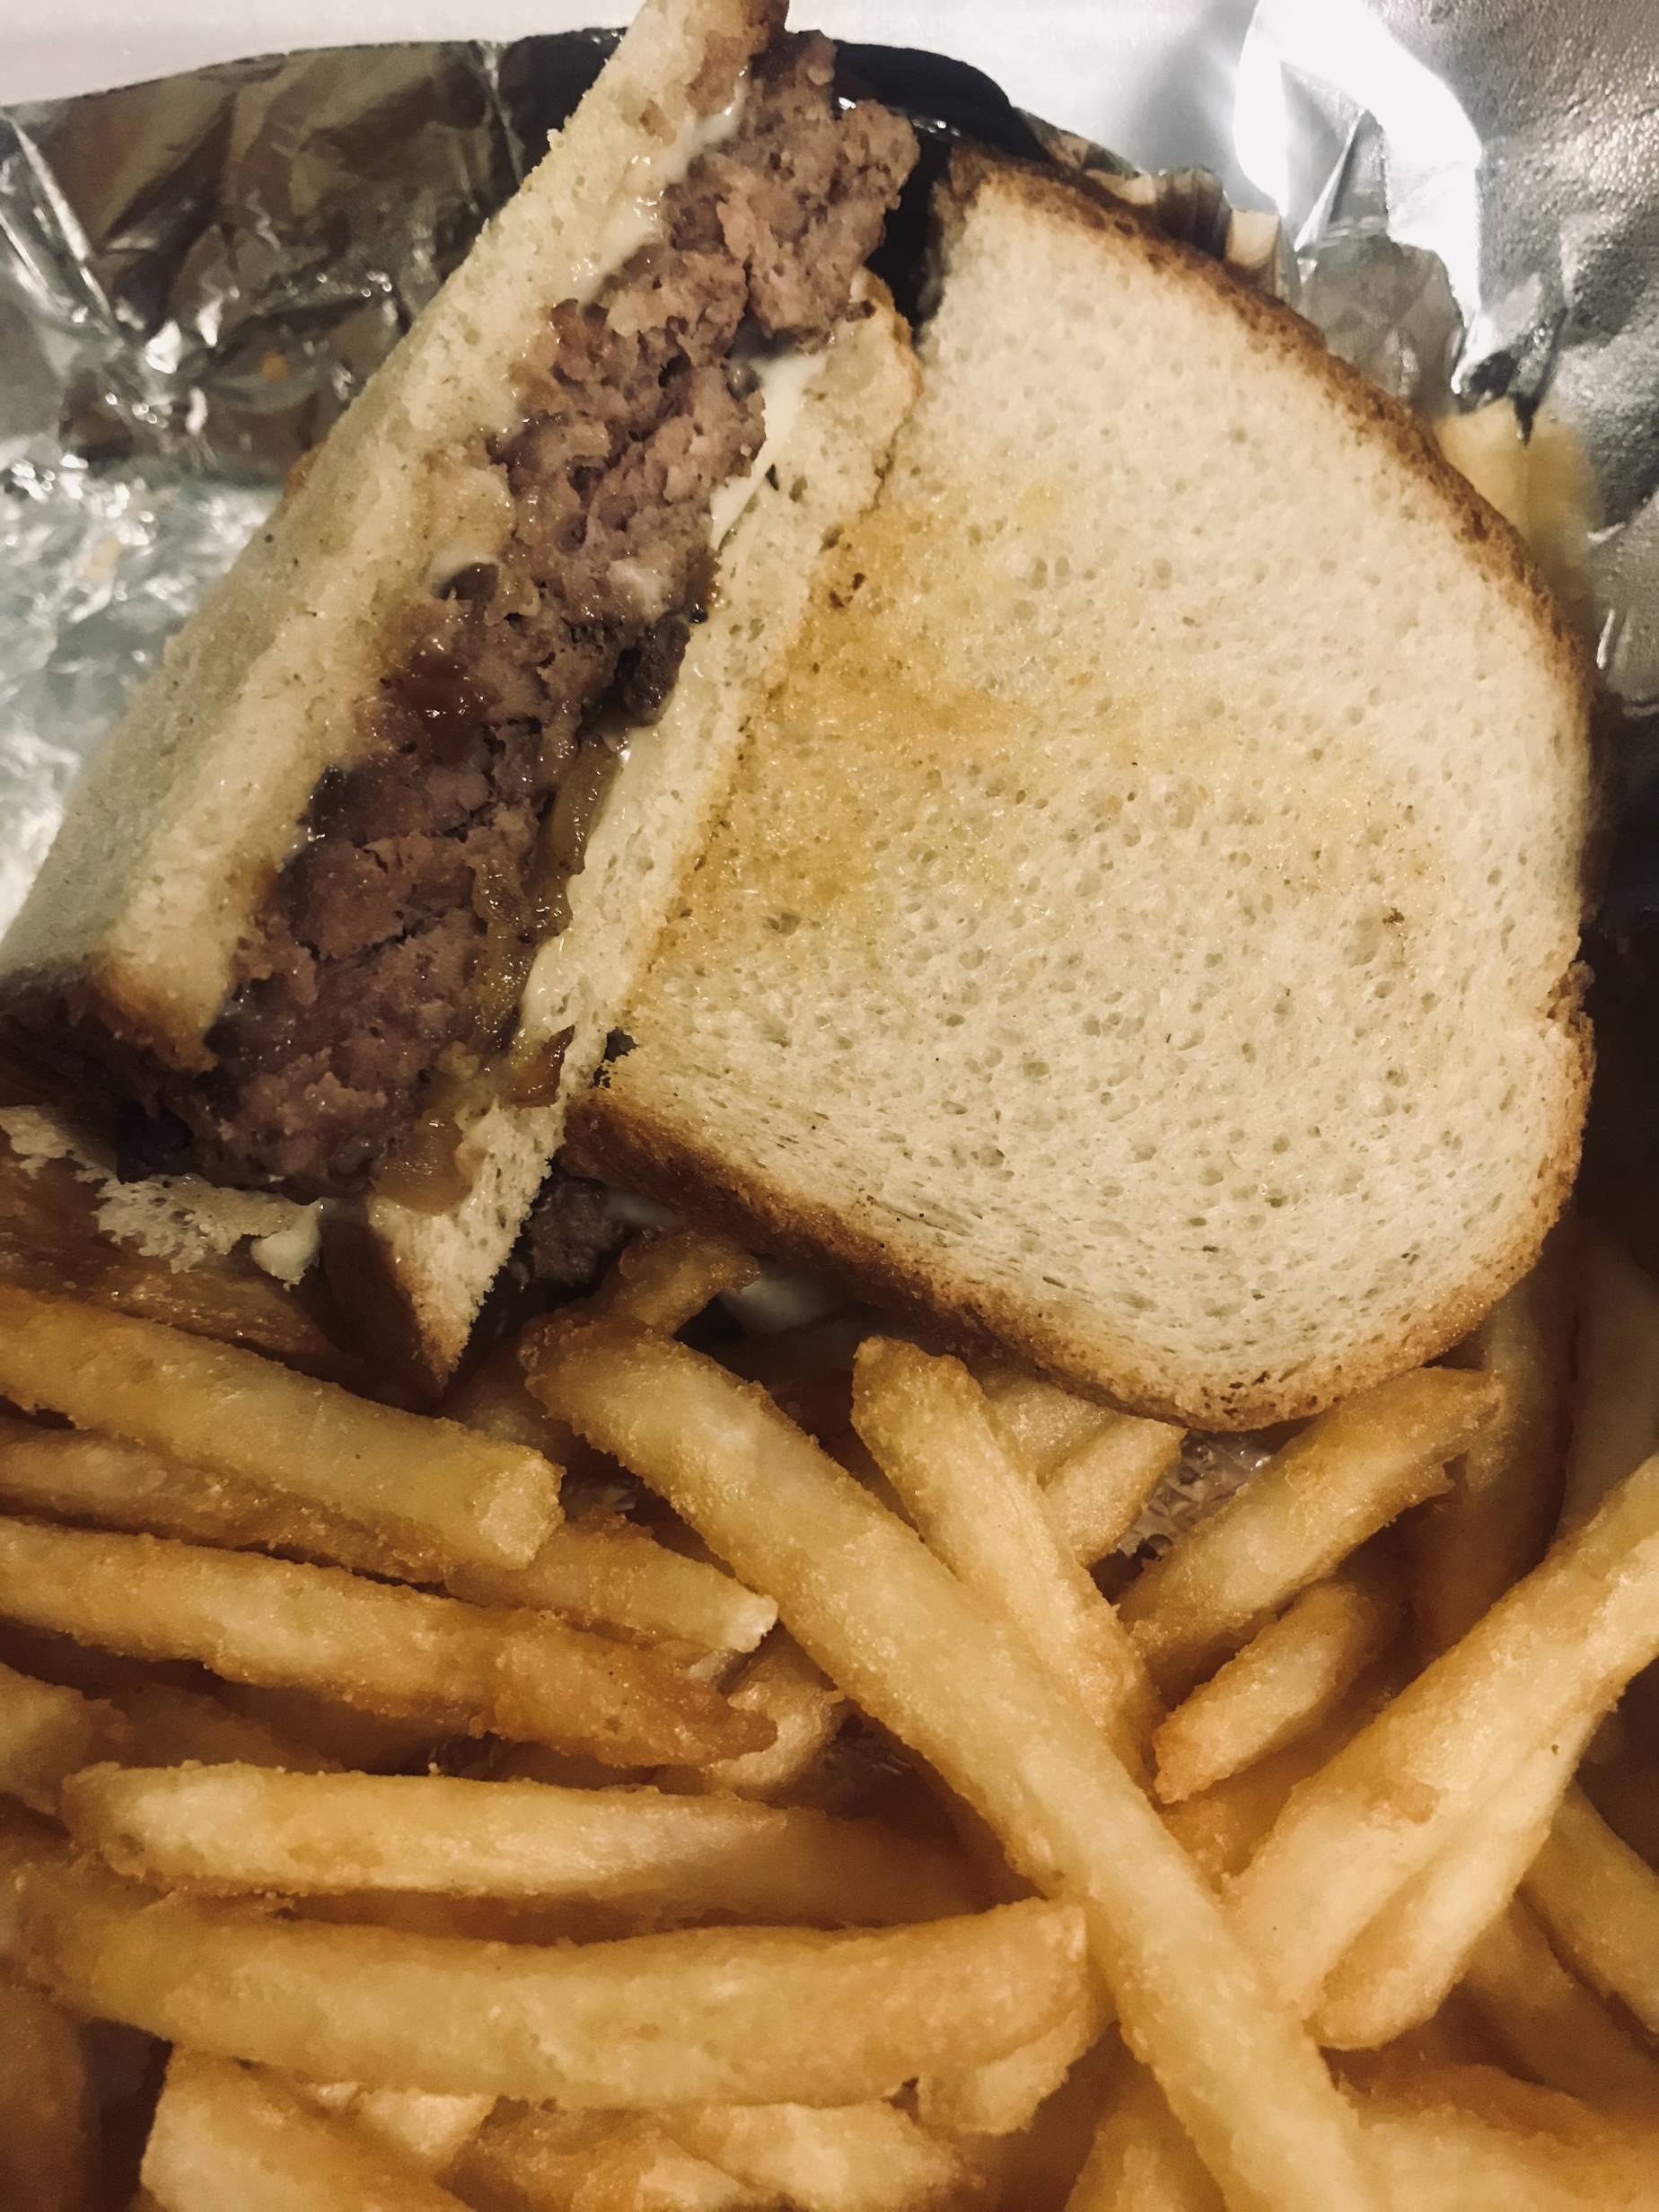 Patty Melt at Goldyâ€™s Bar and Grill. One half overlaps the other and inside a layer of burger, cheese, and grilled onion over a bed of seasoned, golden fries on a sheet of  aluminum foil in a styrofoam to-go box. Photo by Kanea Hughes.